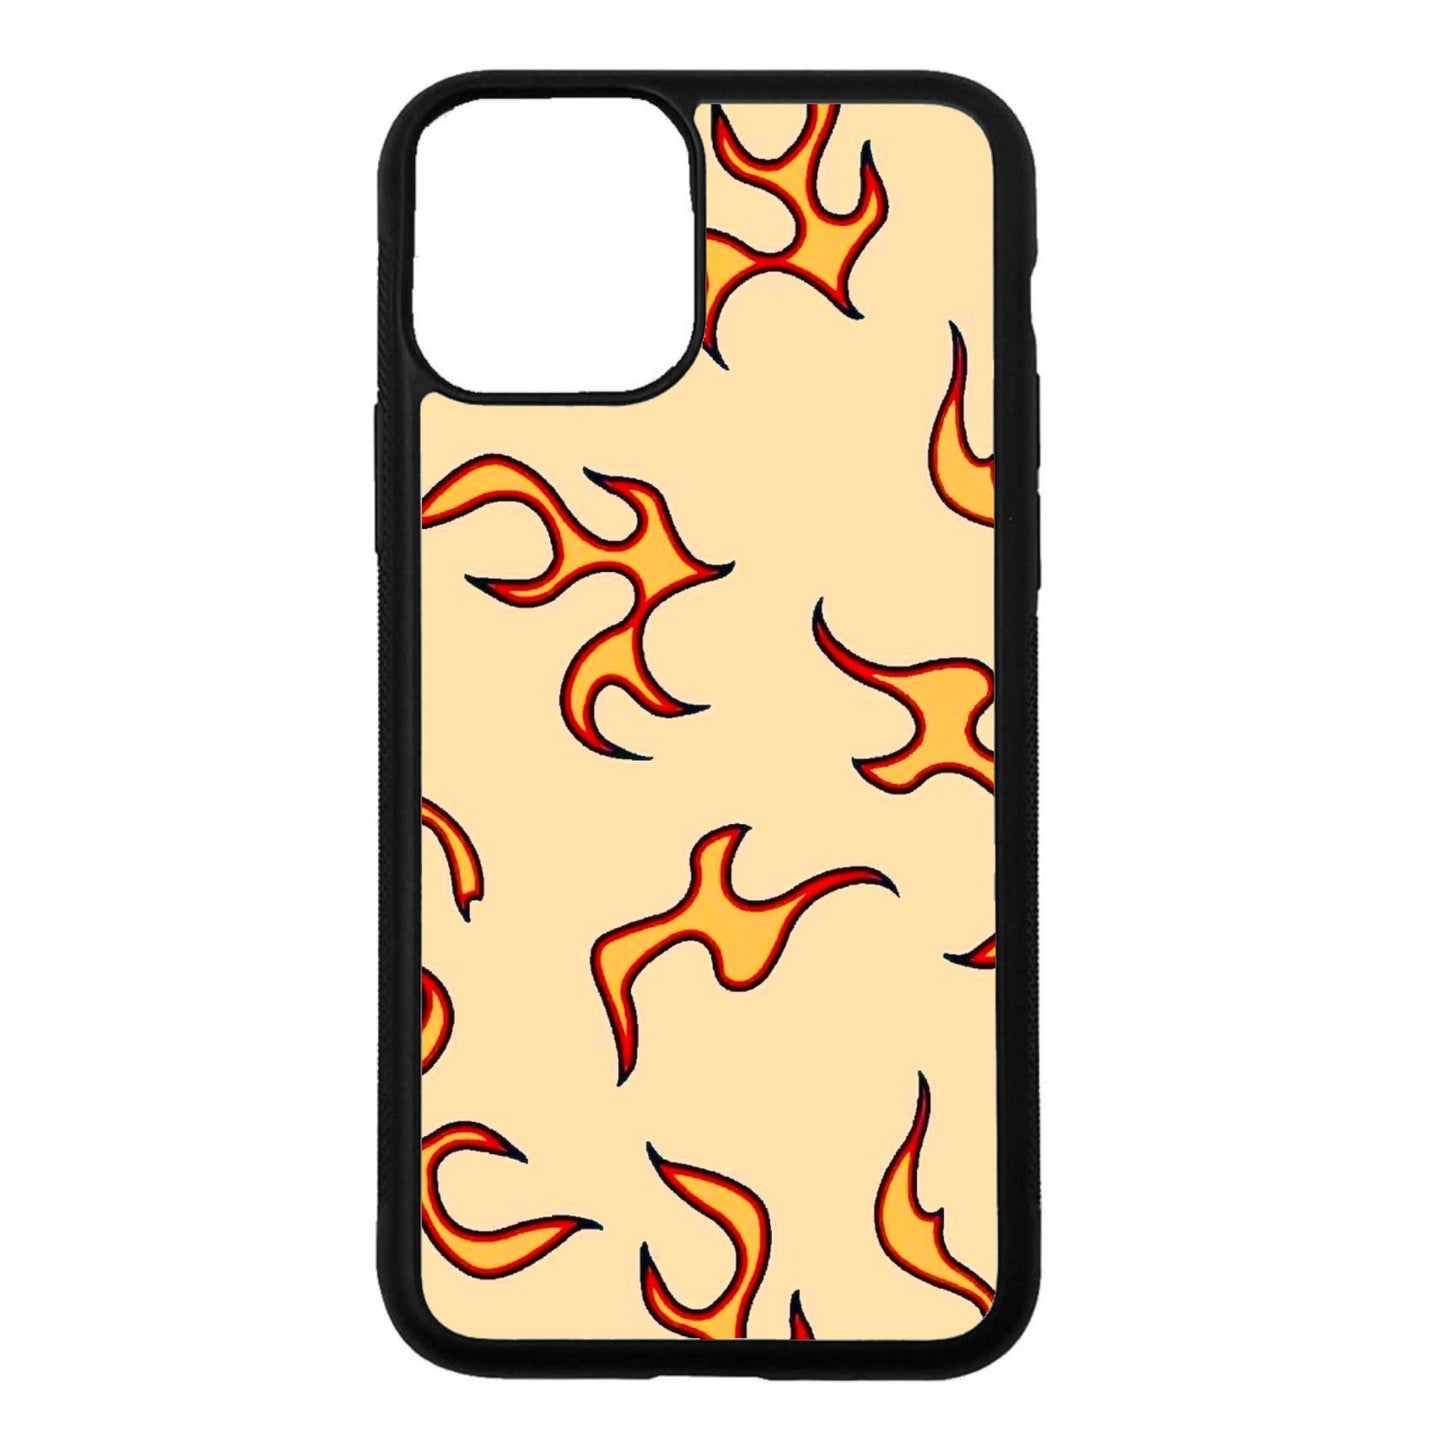 more flame cases - Mai Cases